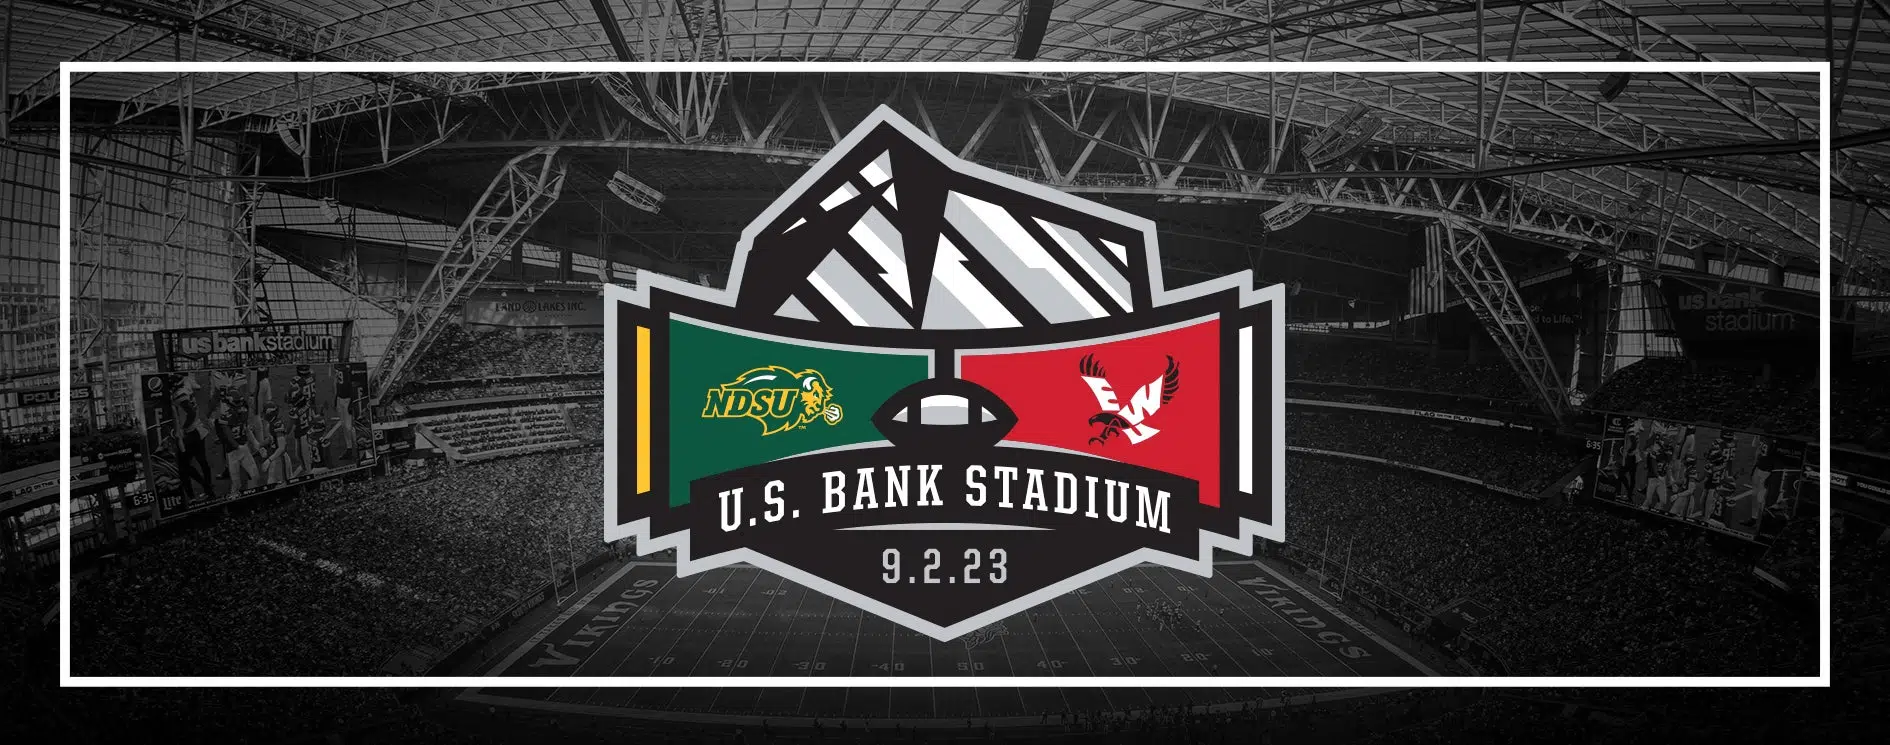 Tickets On Sale March 31 for NDSU Football at U.S. Bank Stadium Bison